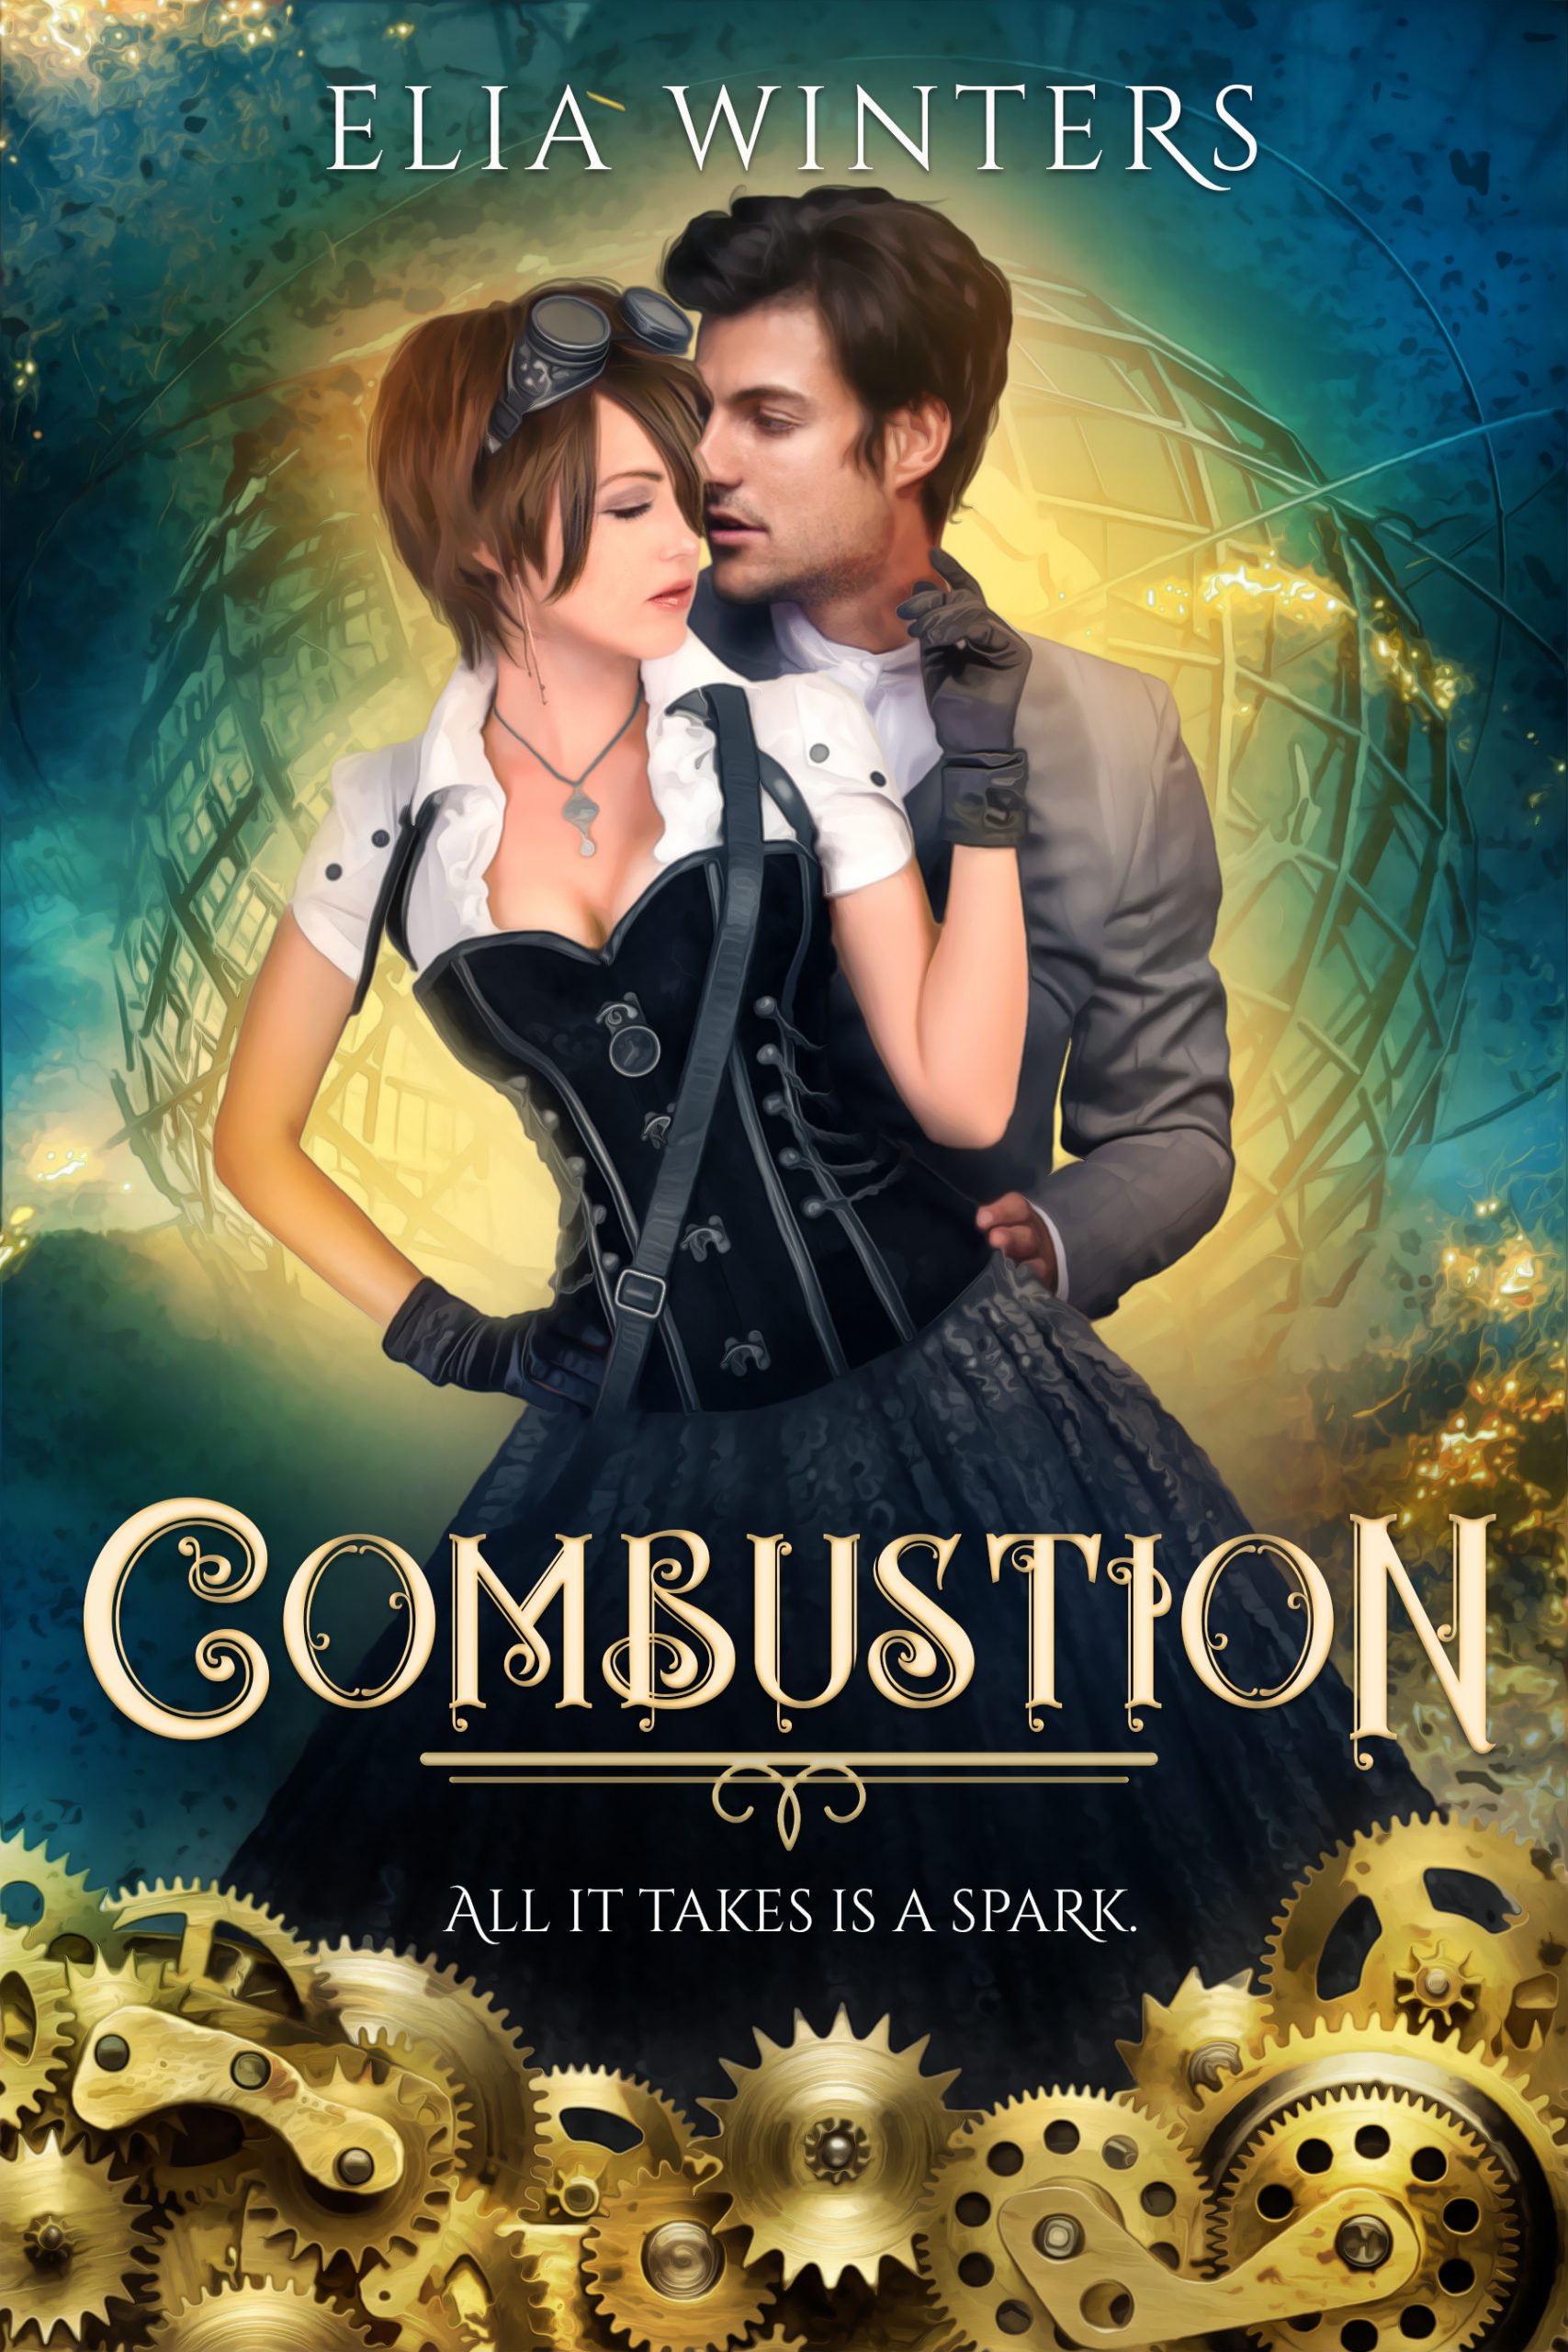 Book cover for combustion, with a man and woman in a clinch against a stylized steel globe and gears